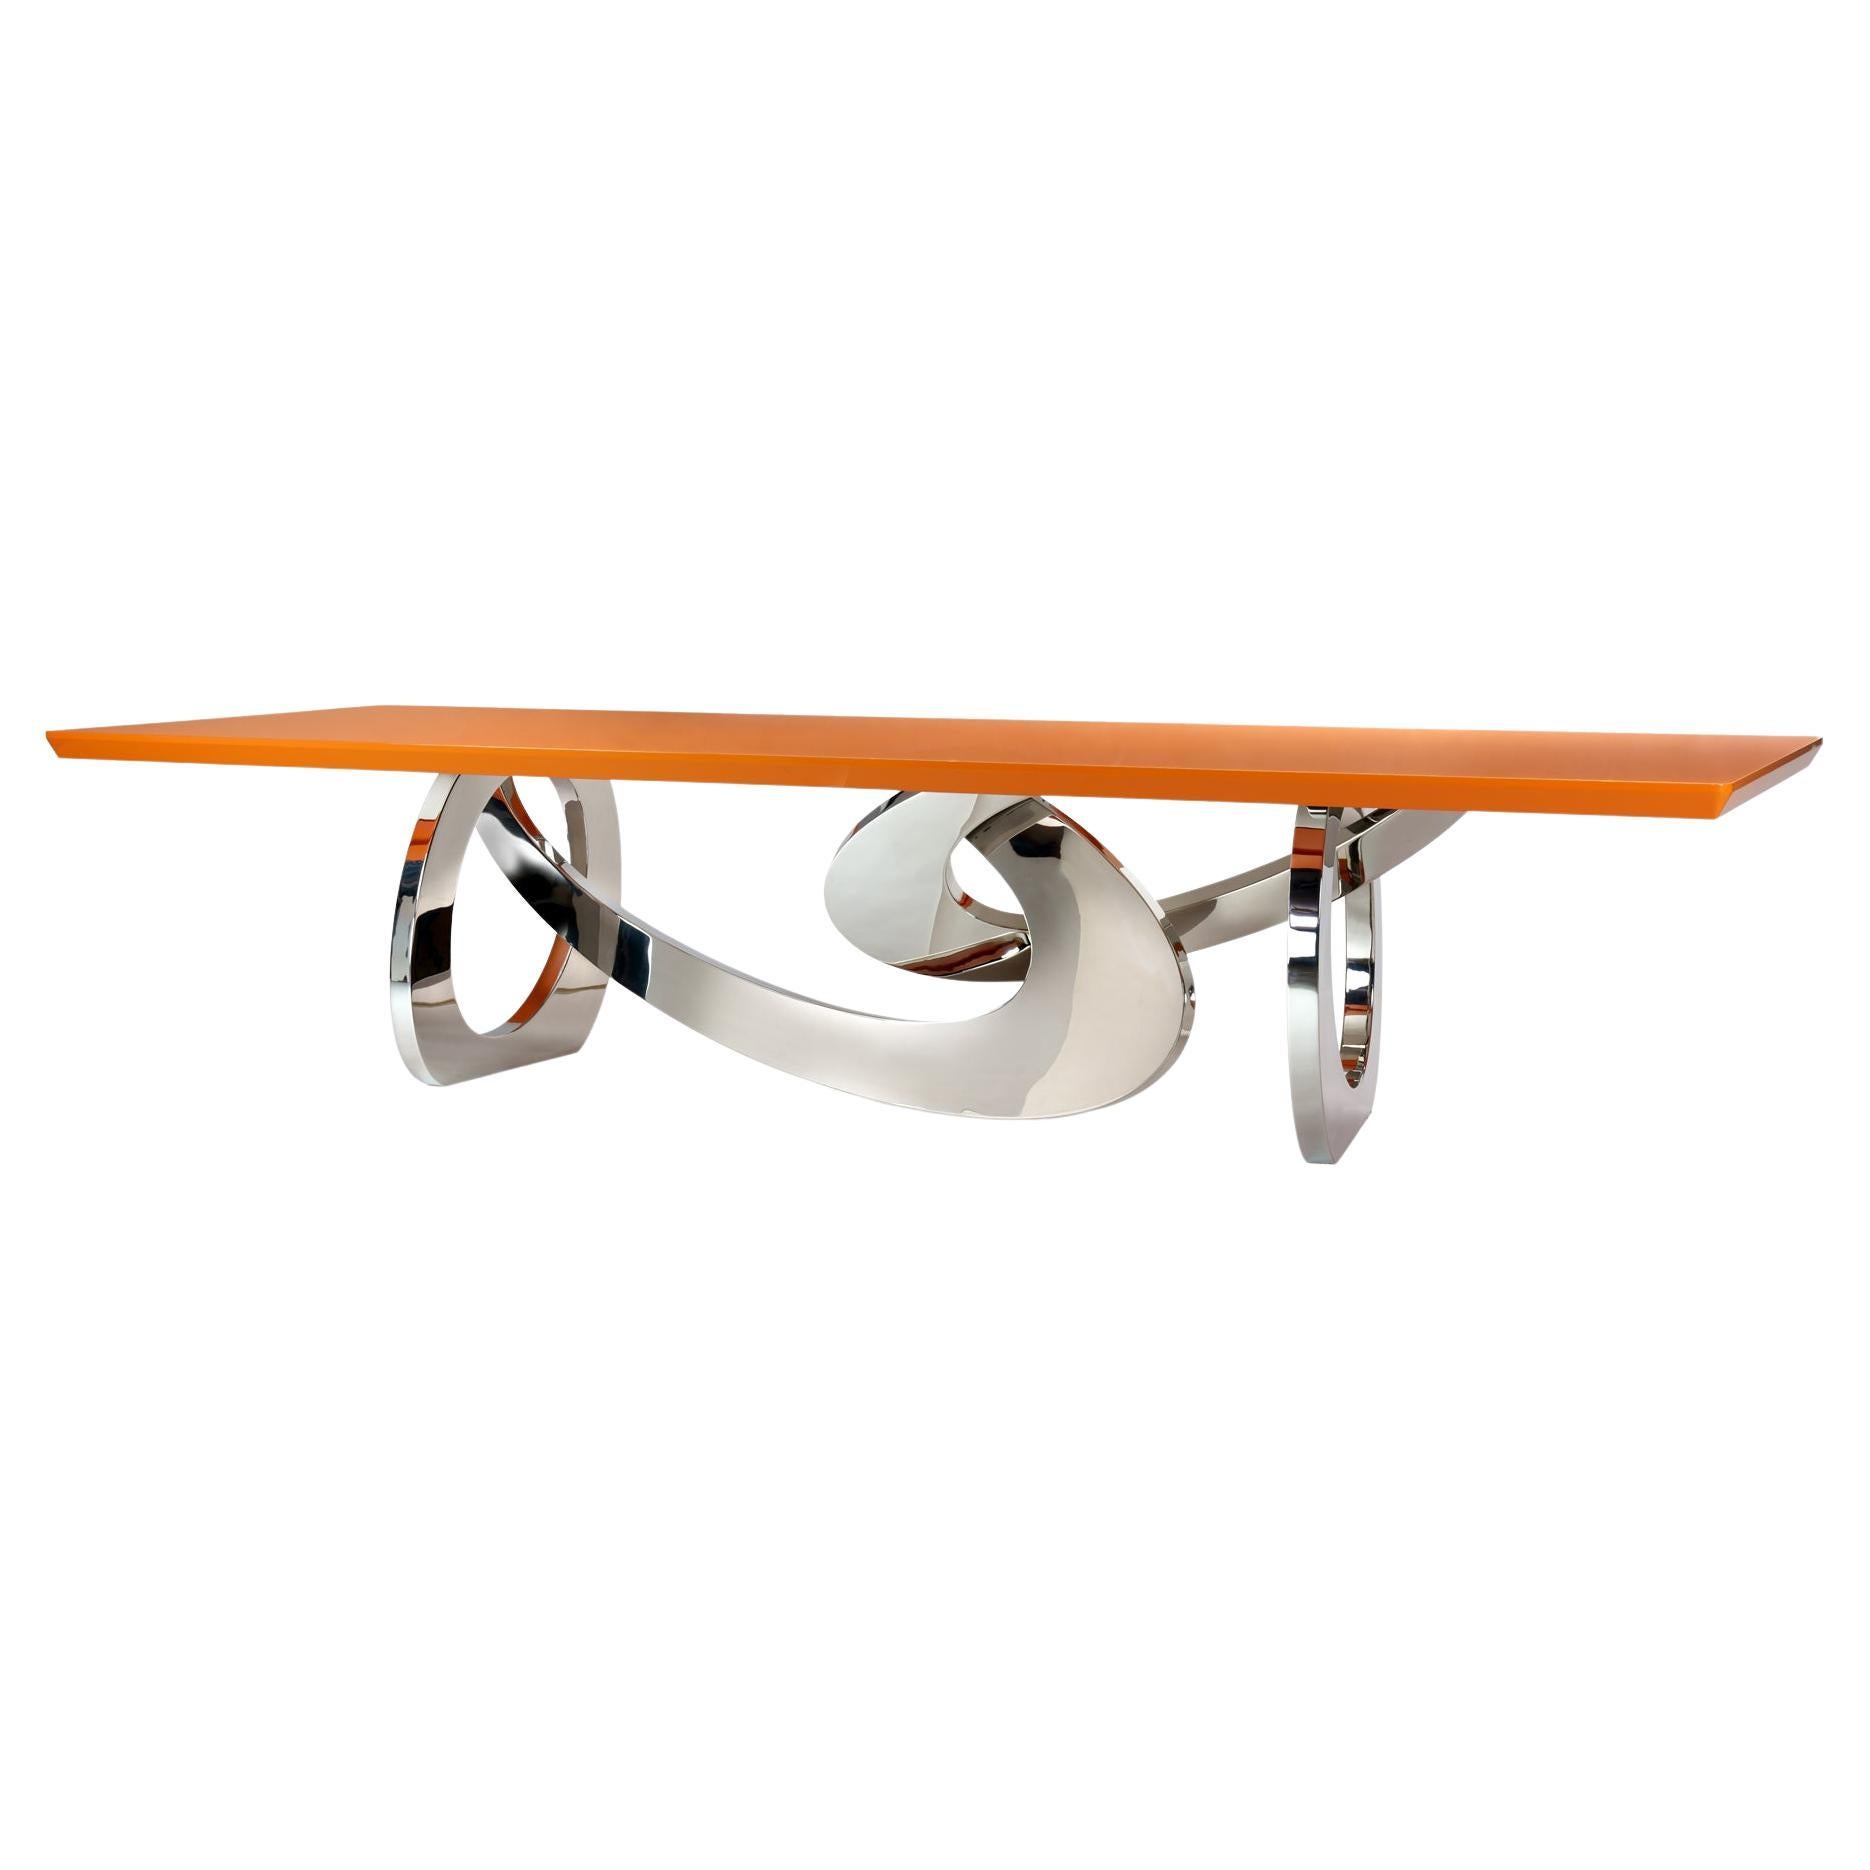 Original Executive Desk Dining Table from Film House of Gucci Unique Piece  Italy For Sale at 1stDibs | gucci table, gucchi auction sites, house of  gucci auction